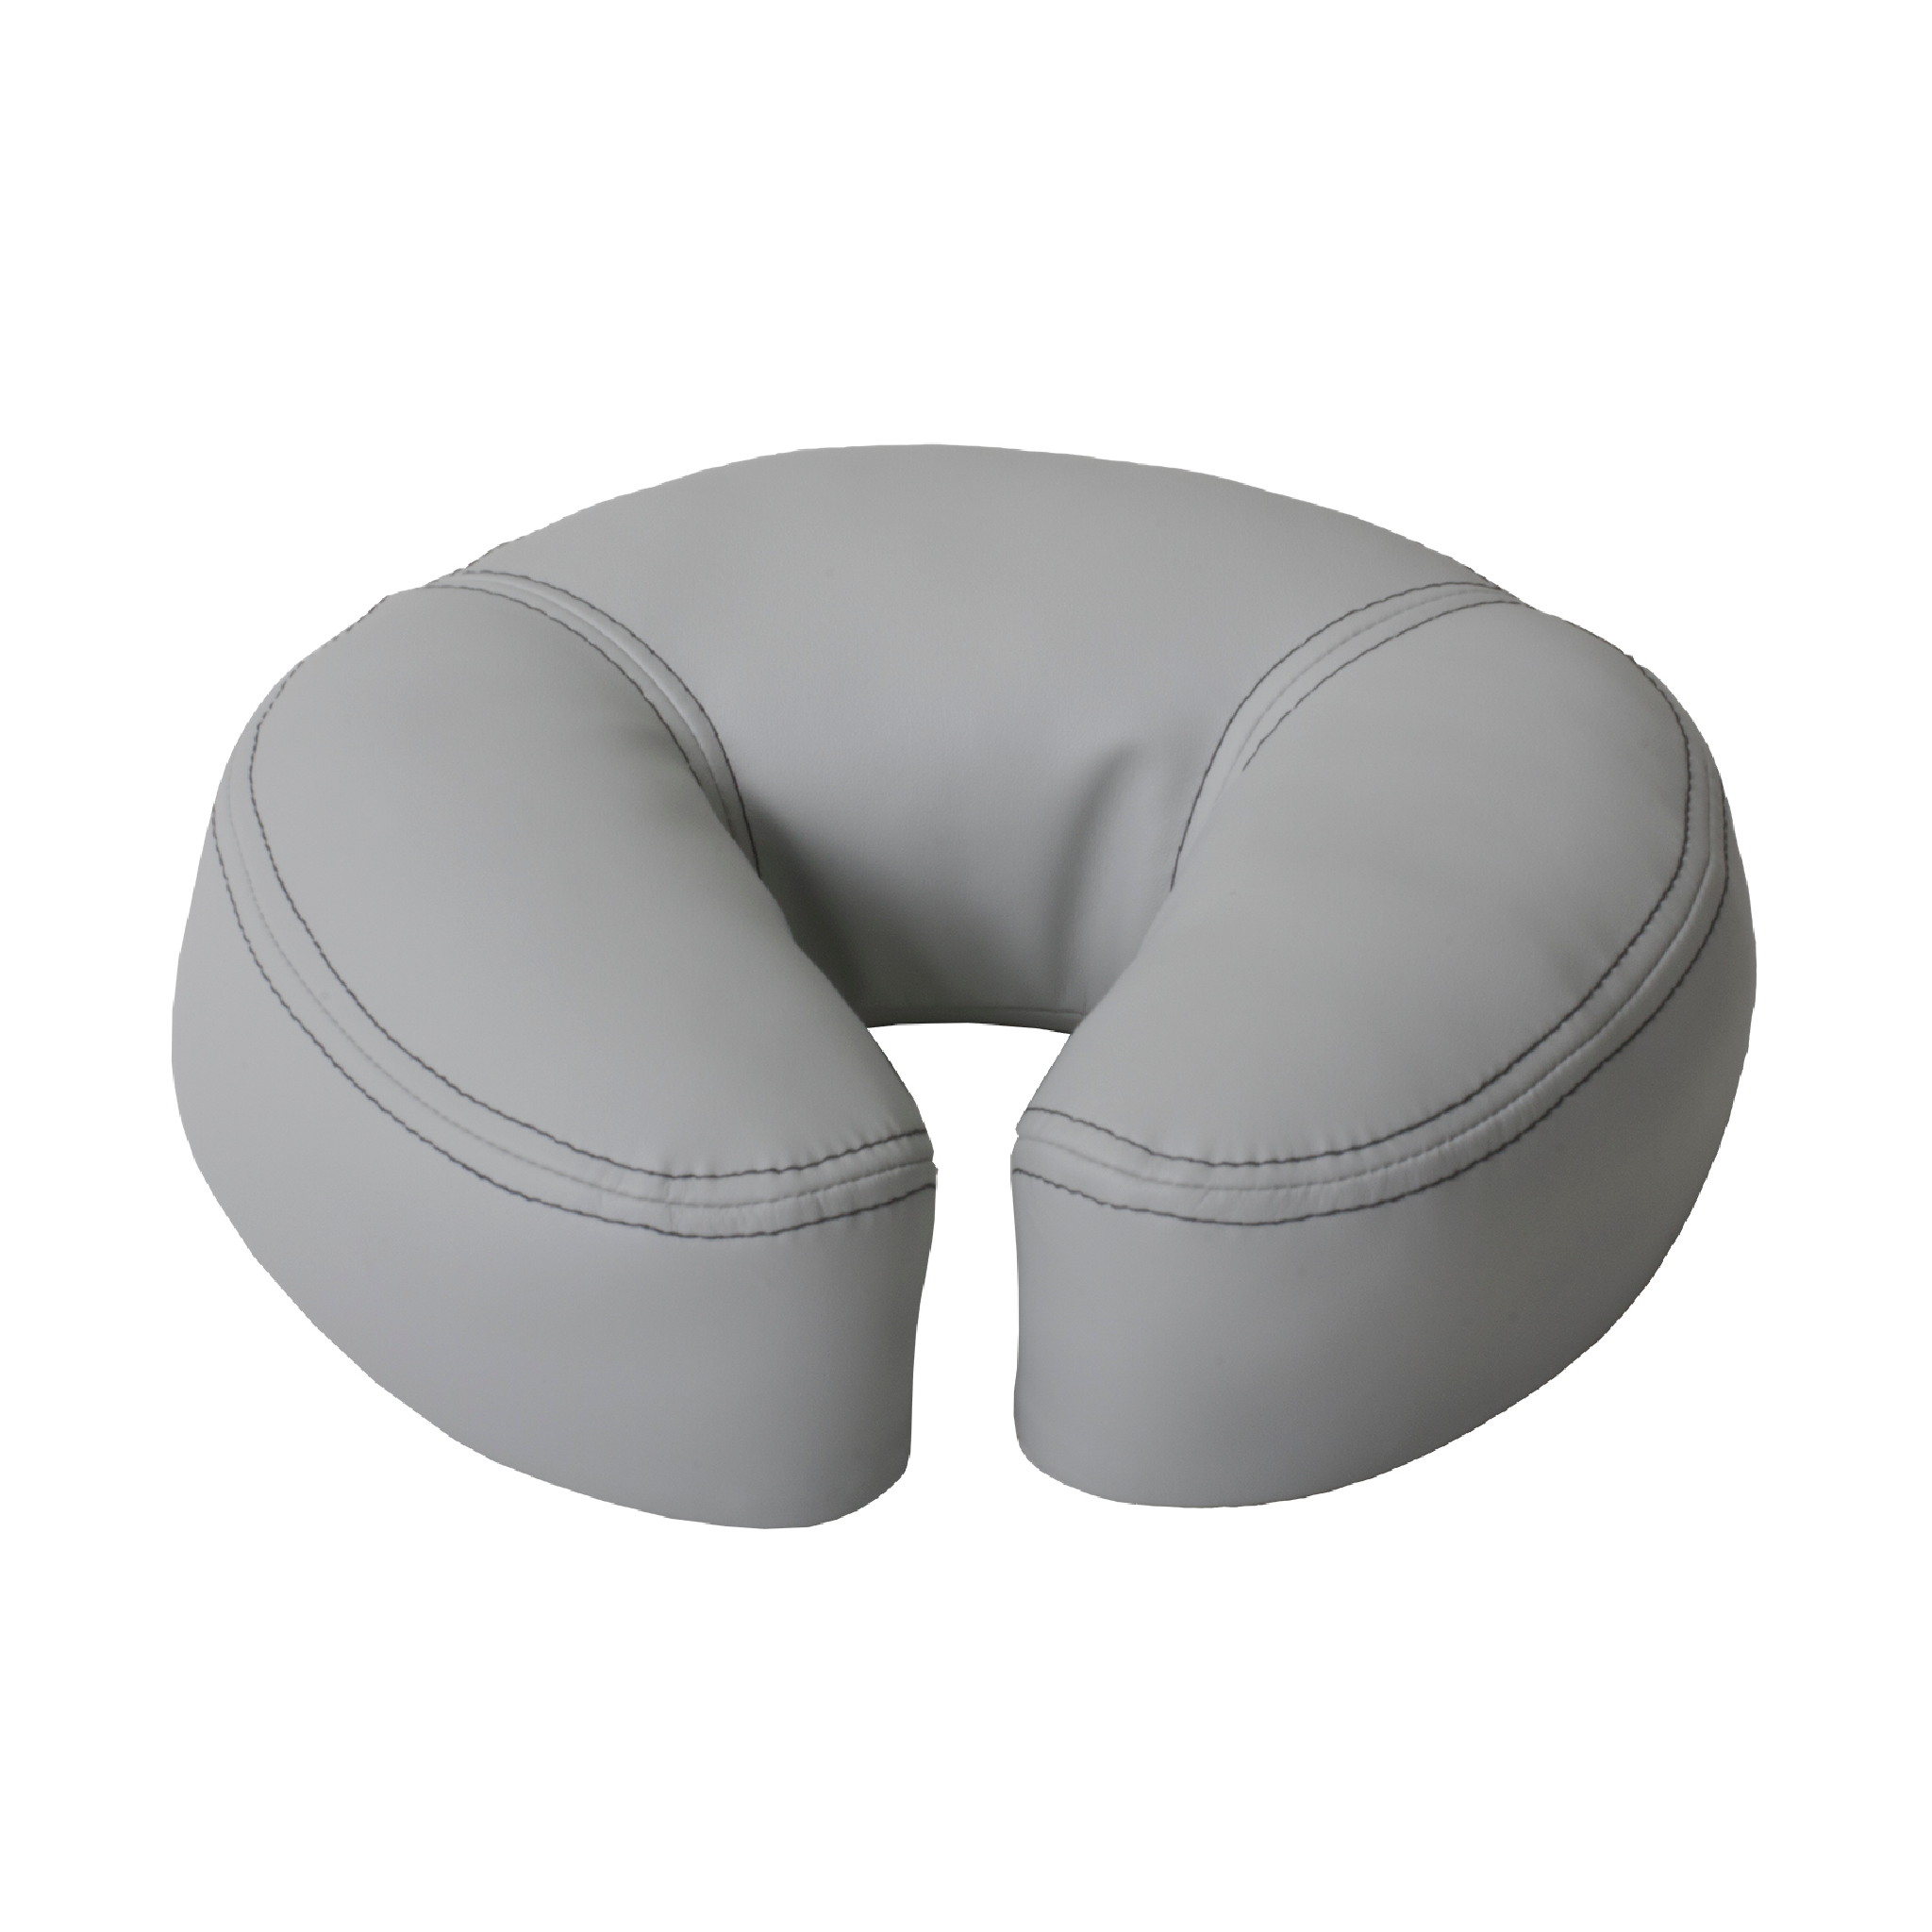 EarthLite Strata Face Pillow for Massage Table 